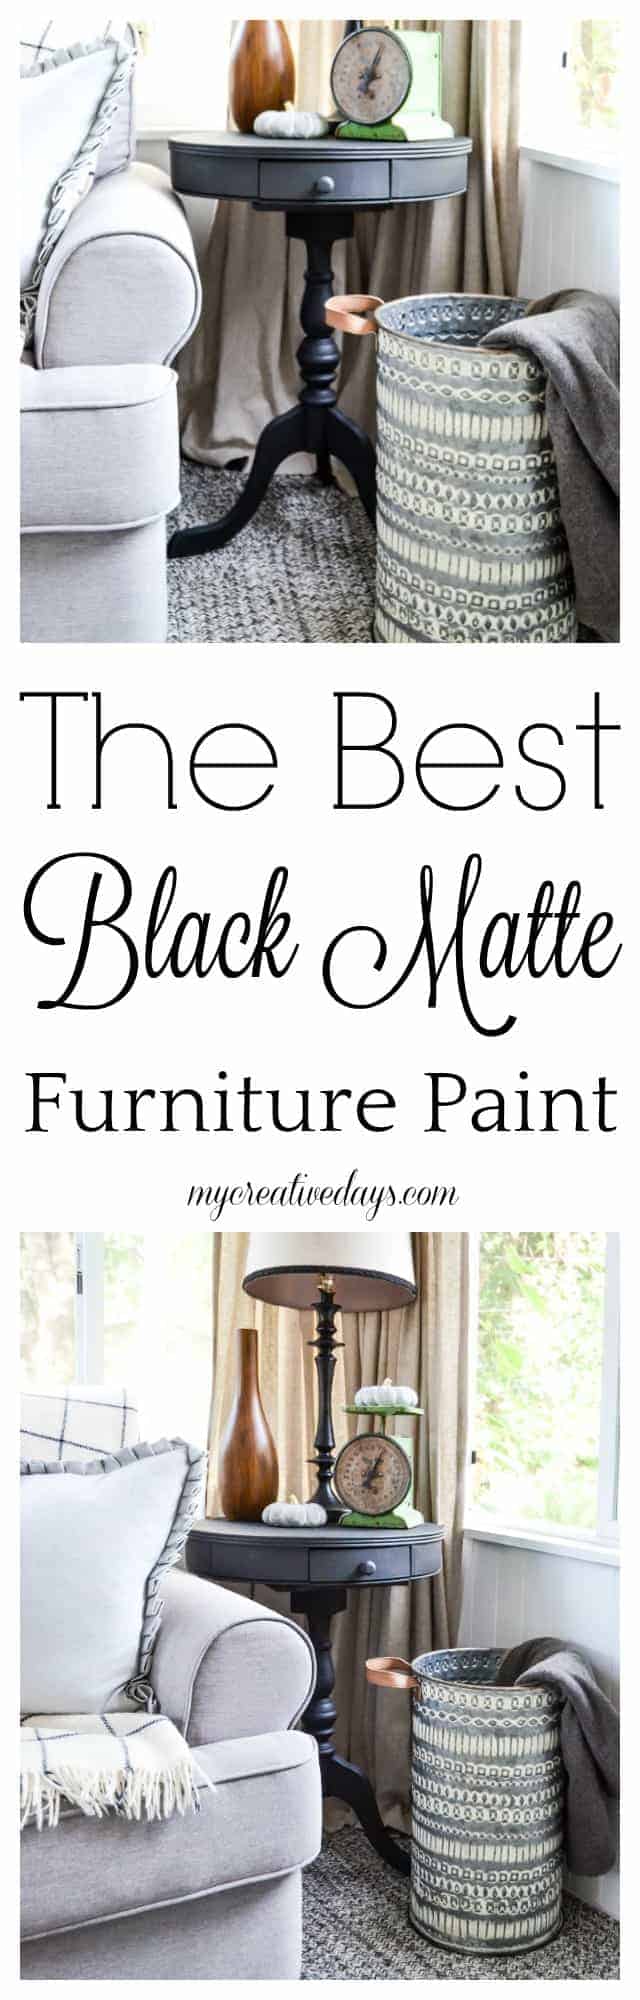 The Top Black Paint for Furniture - Celebrated Nest